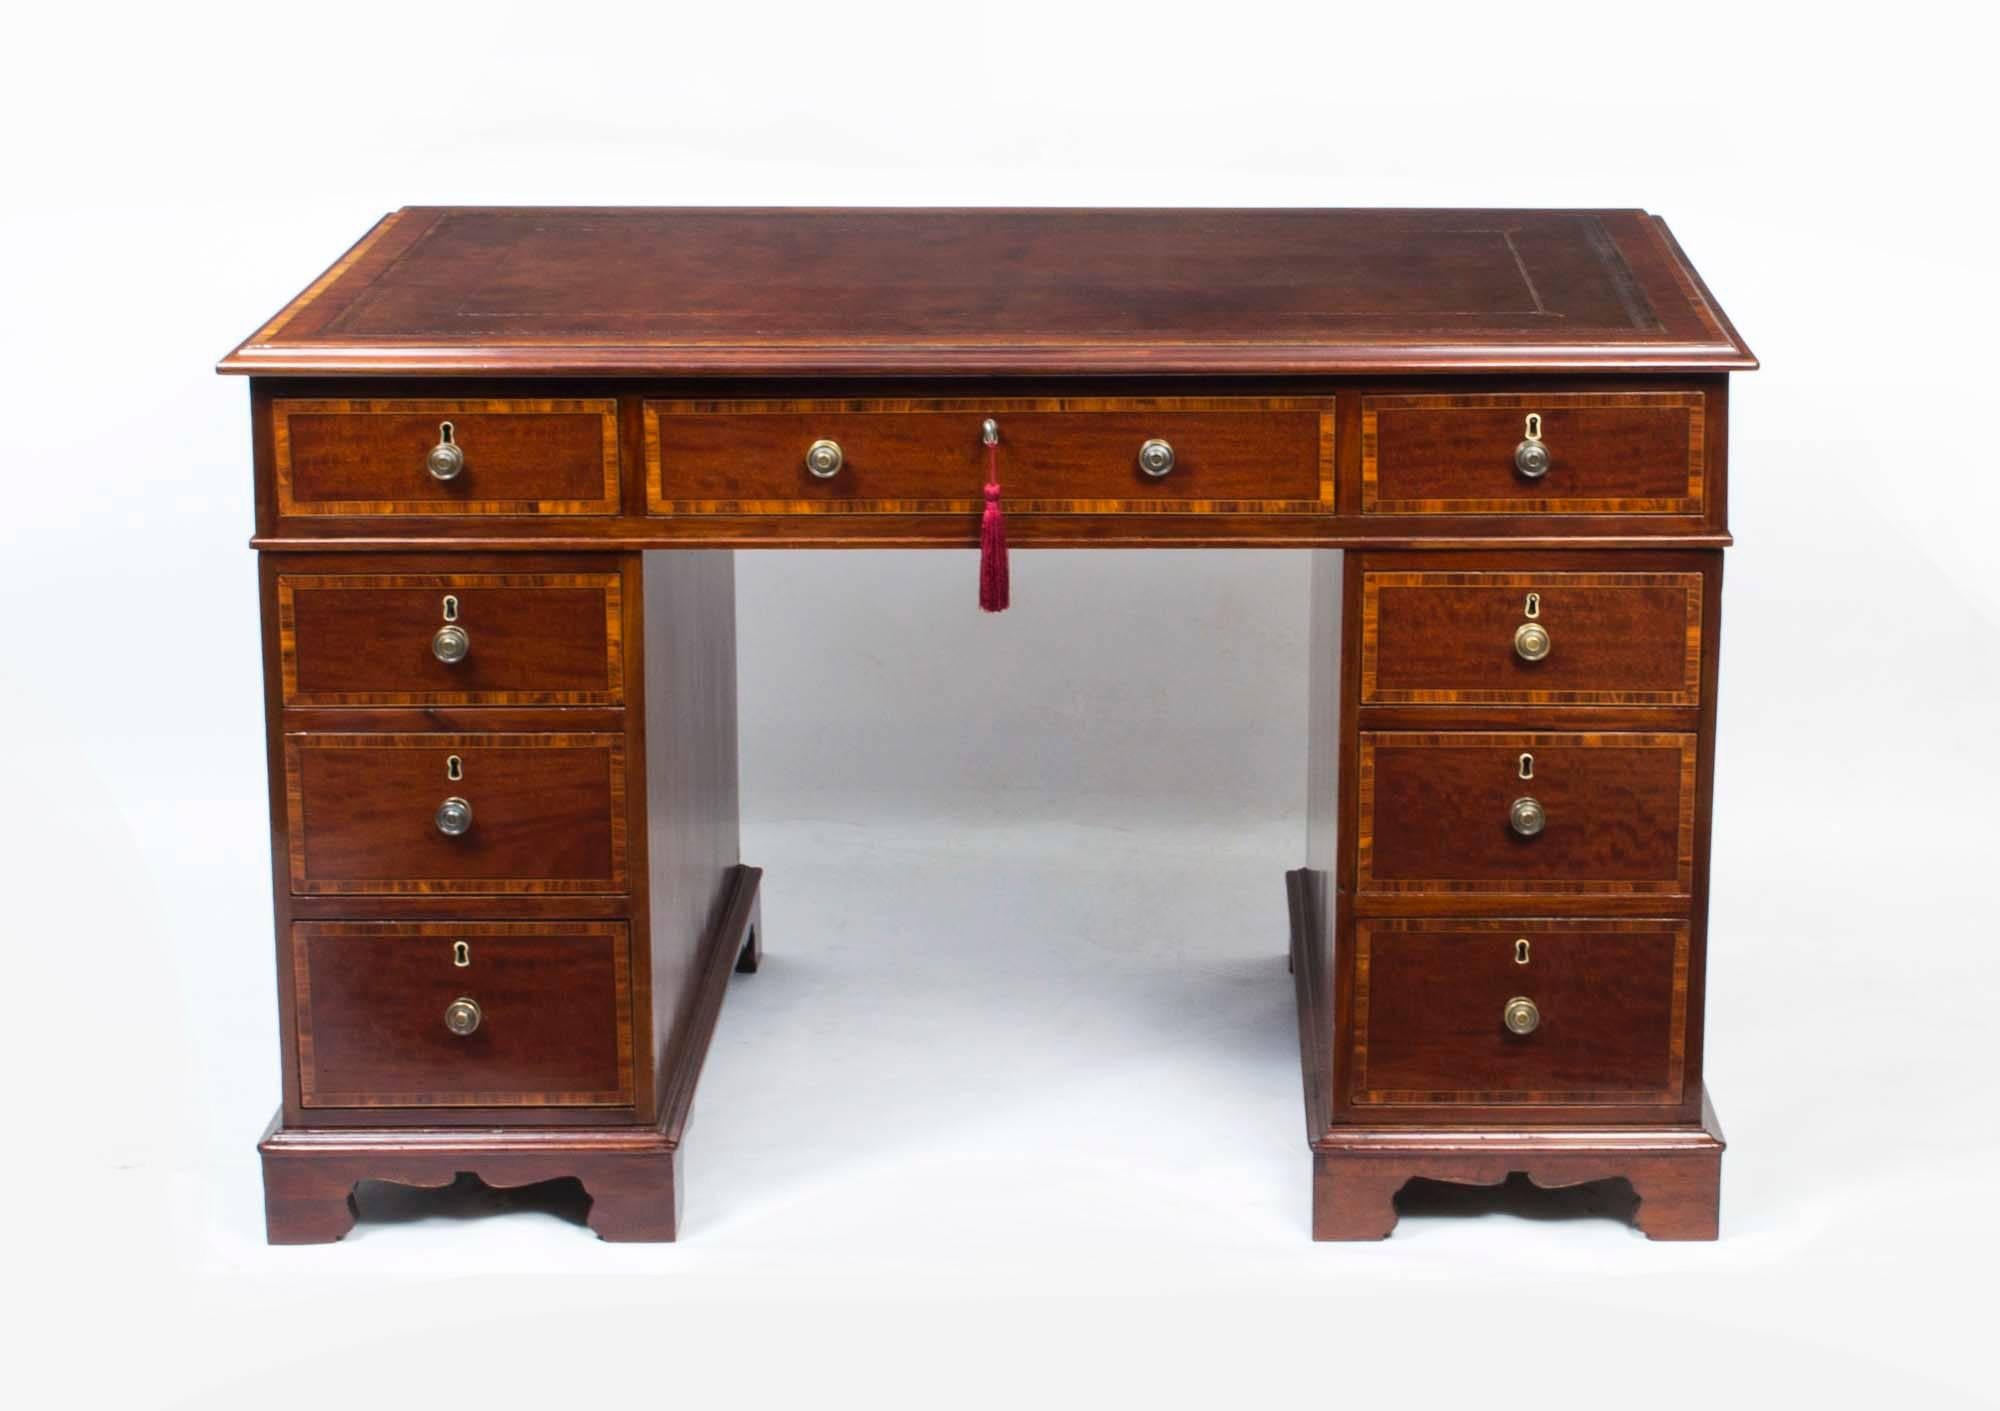 This is a superb antique Victorian flame mahogany and kingwood crossbanded pedestal desk, circa 1860 in date.

It is made from fabulous flame mahogany, the rectangular mustard brown tooled leather inset is original, and the top features an elegant